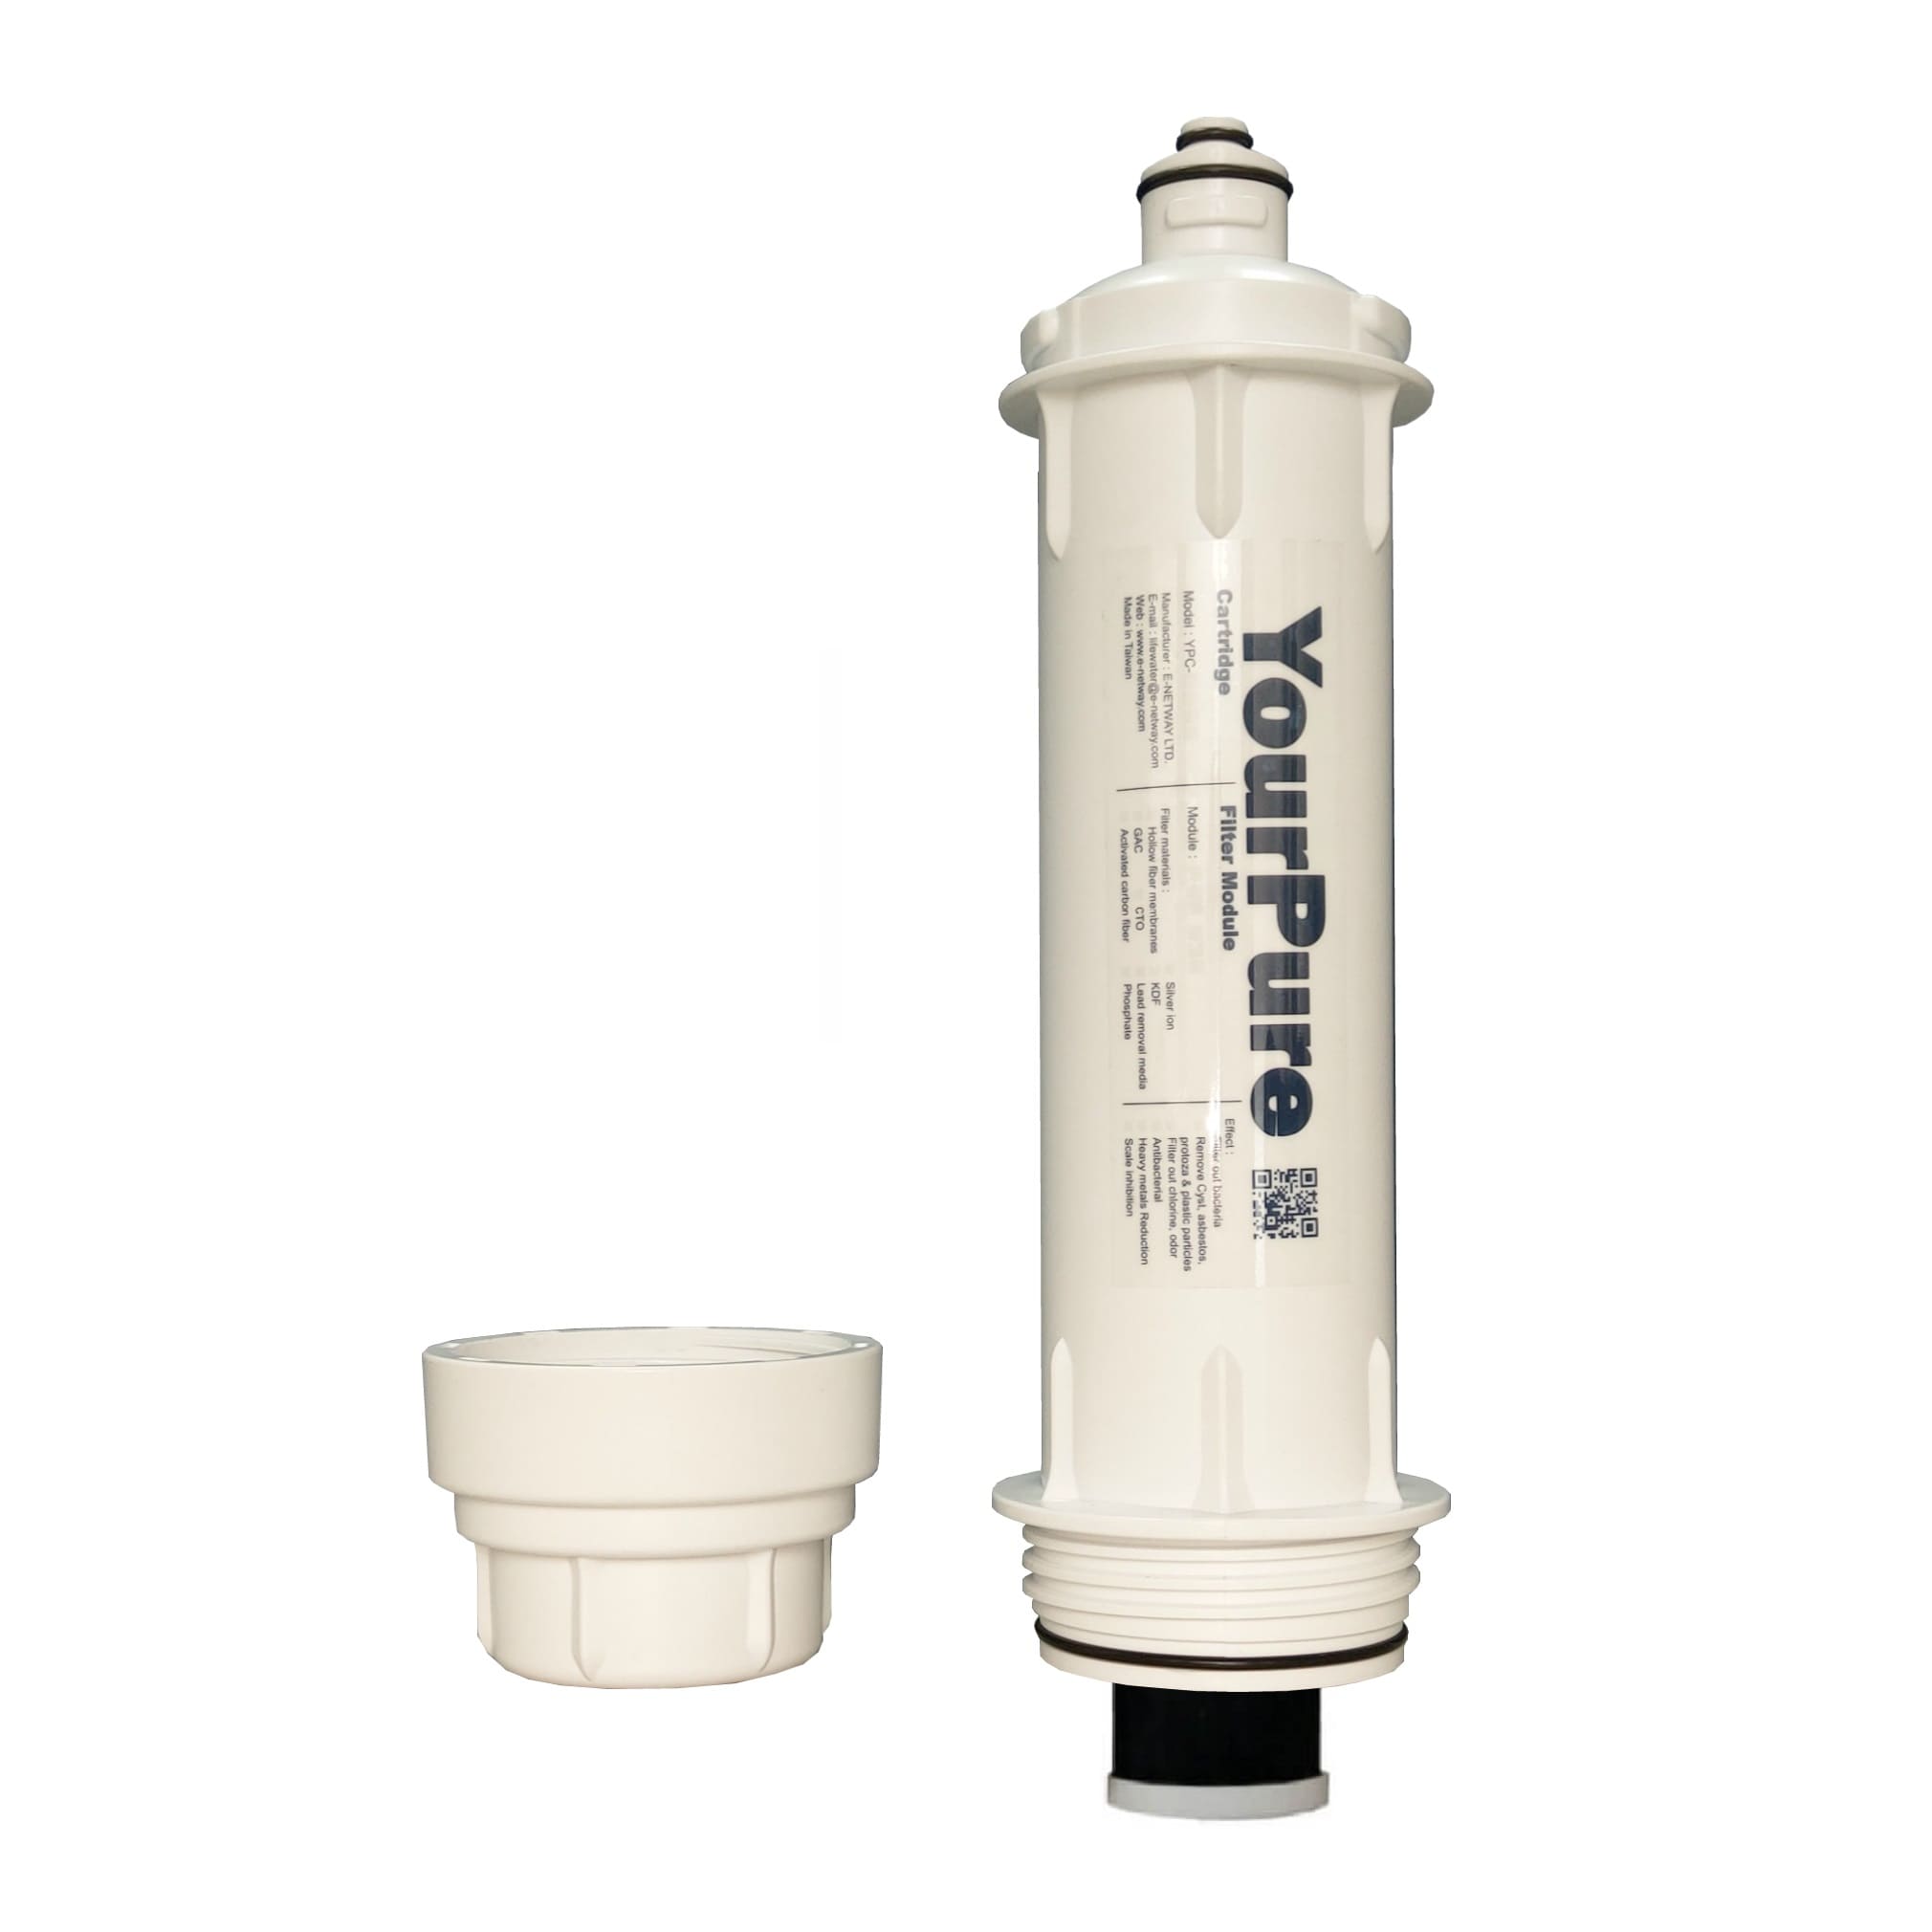 Dechlorination, sterilization and scale inhibition quick rellease water purifier